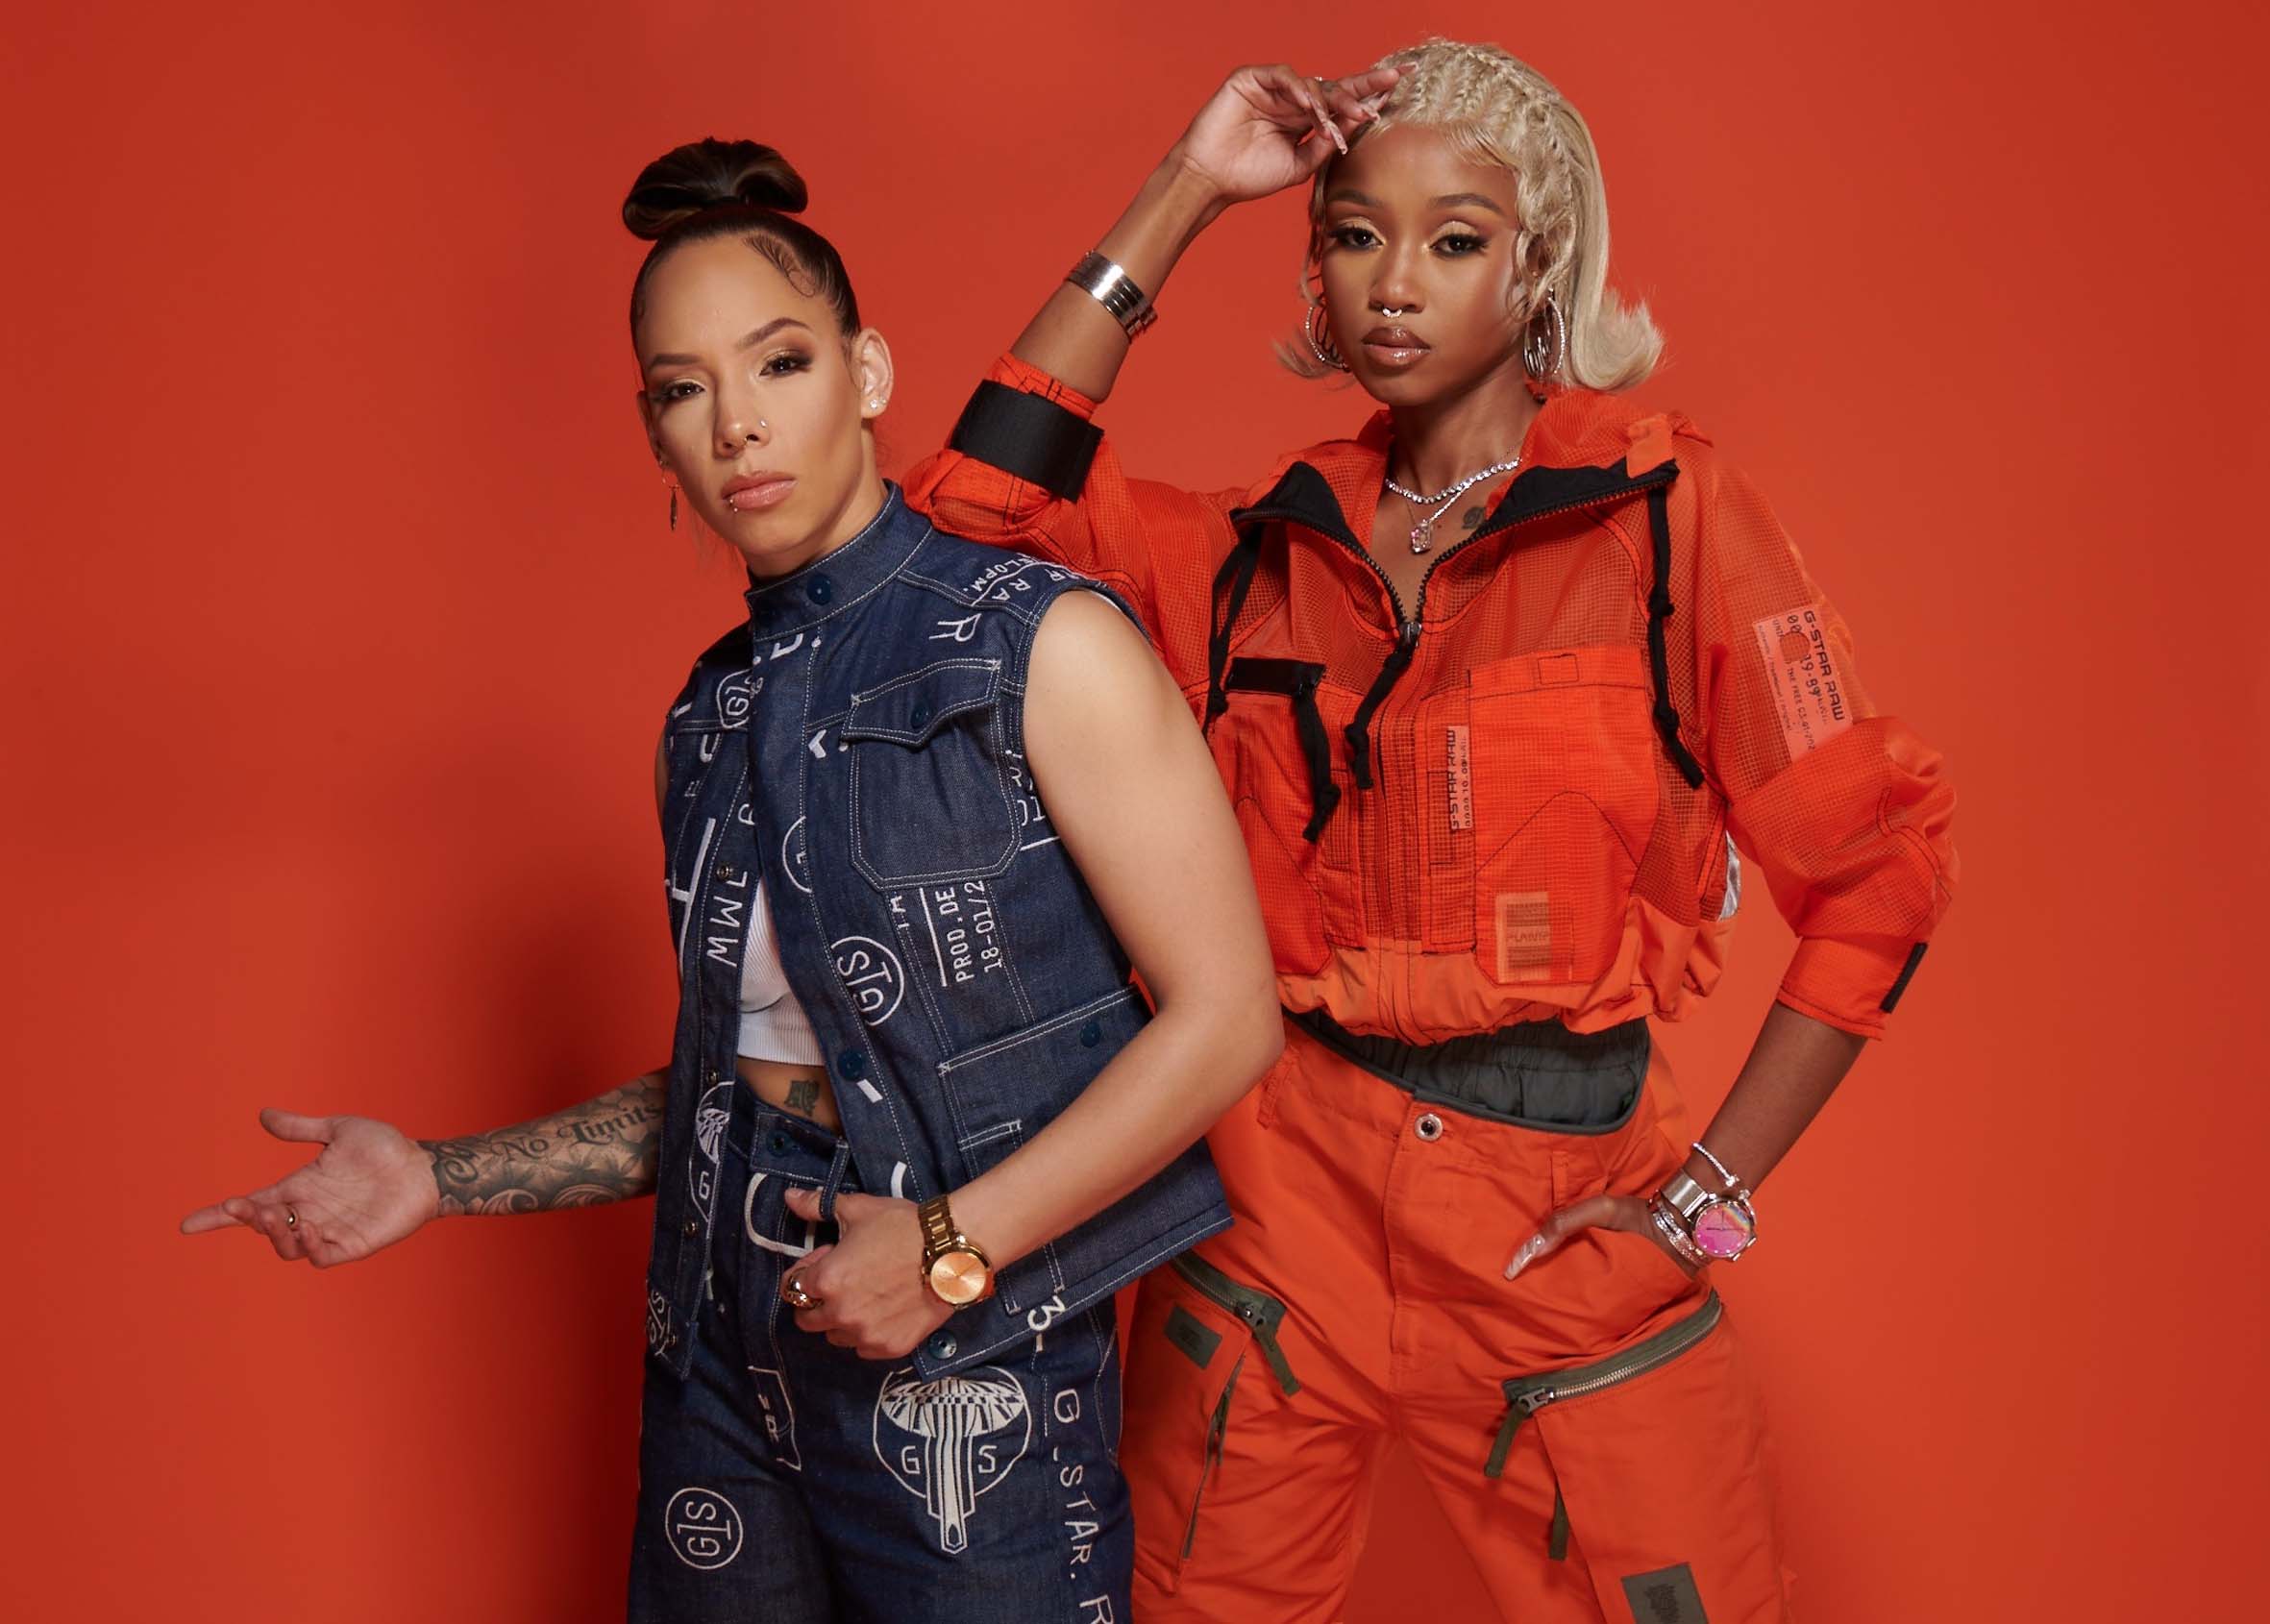 G-Star RAW Teams Up With SA Artists For The Exclusives Launch